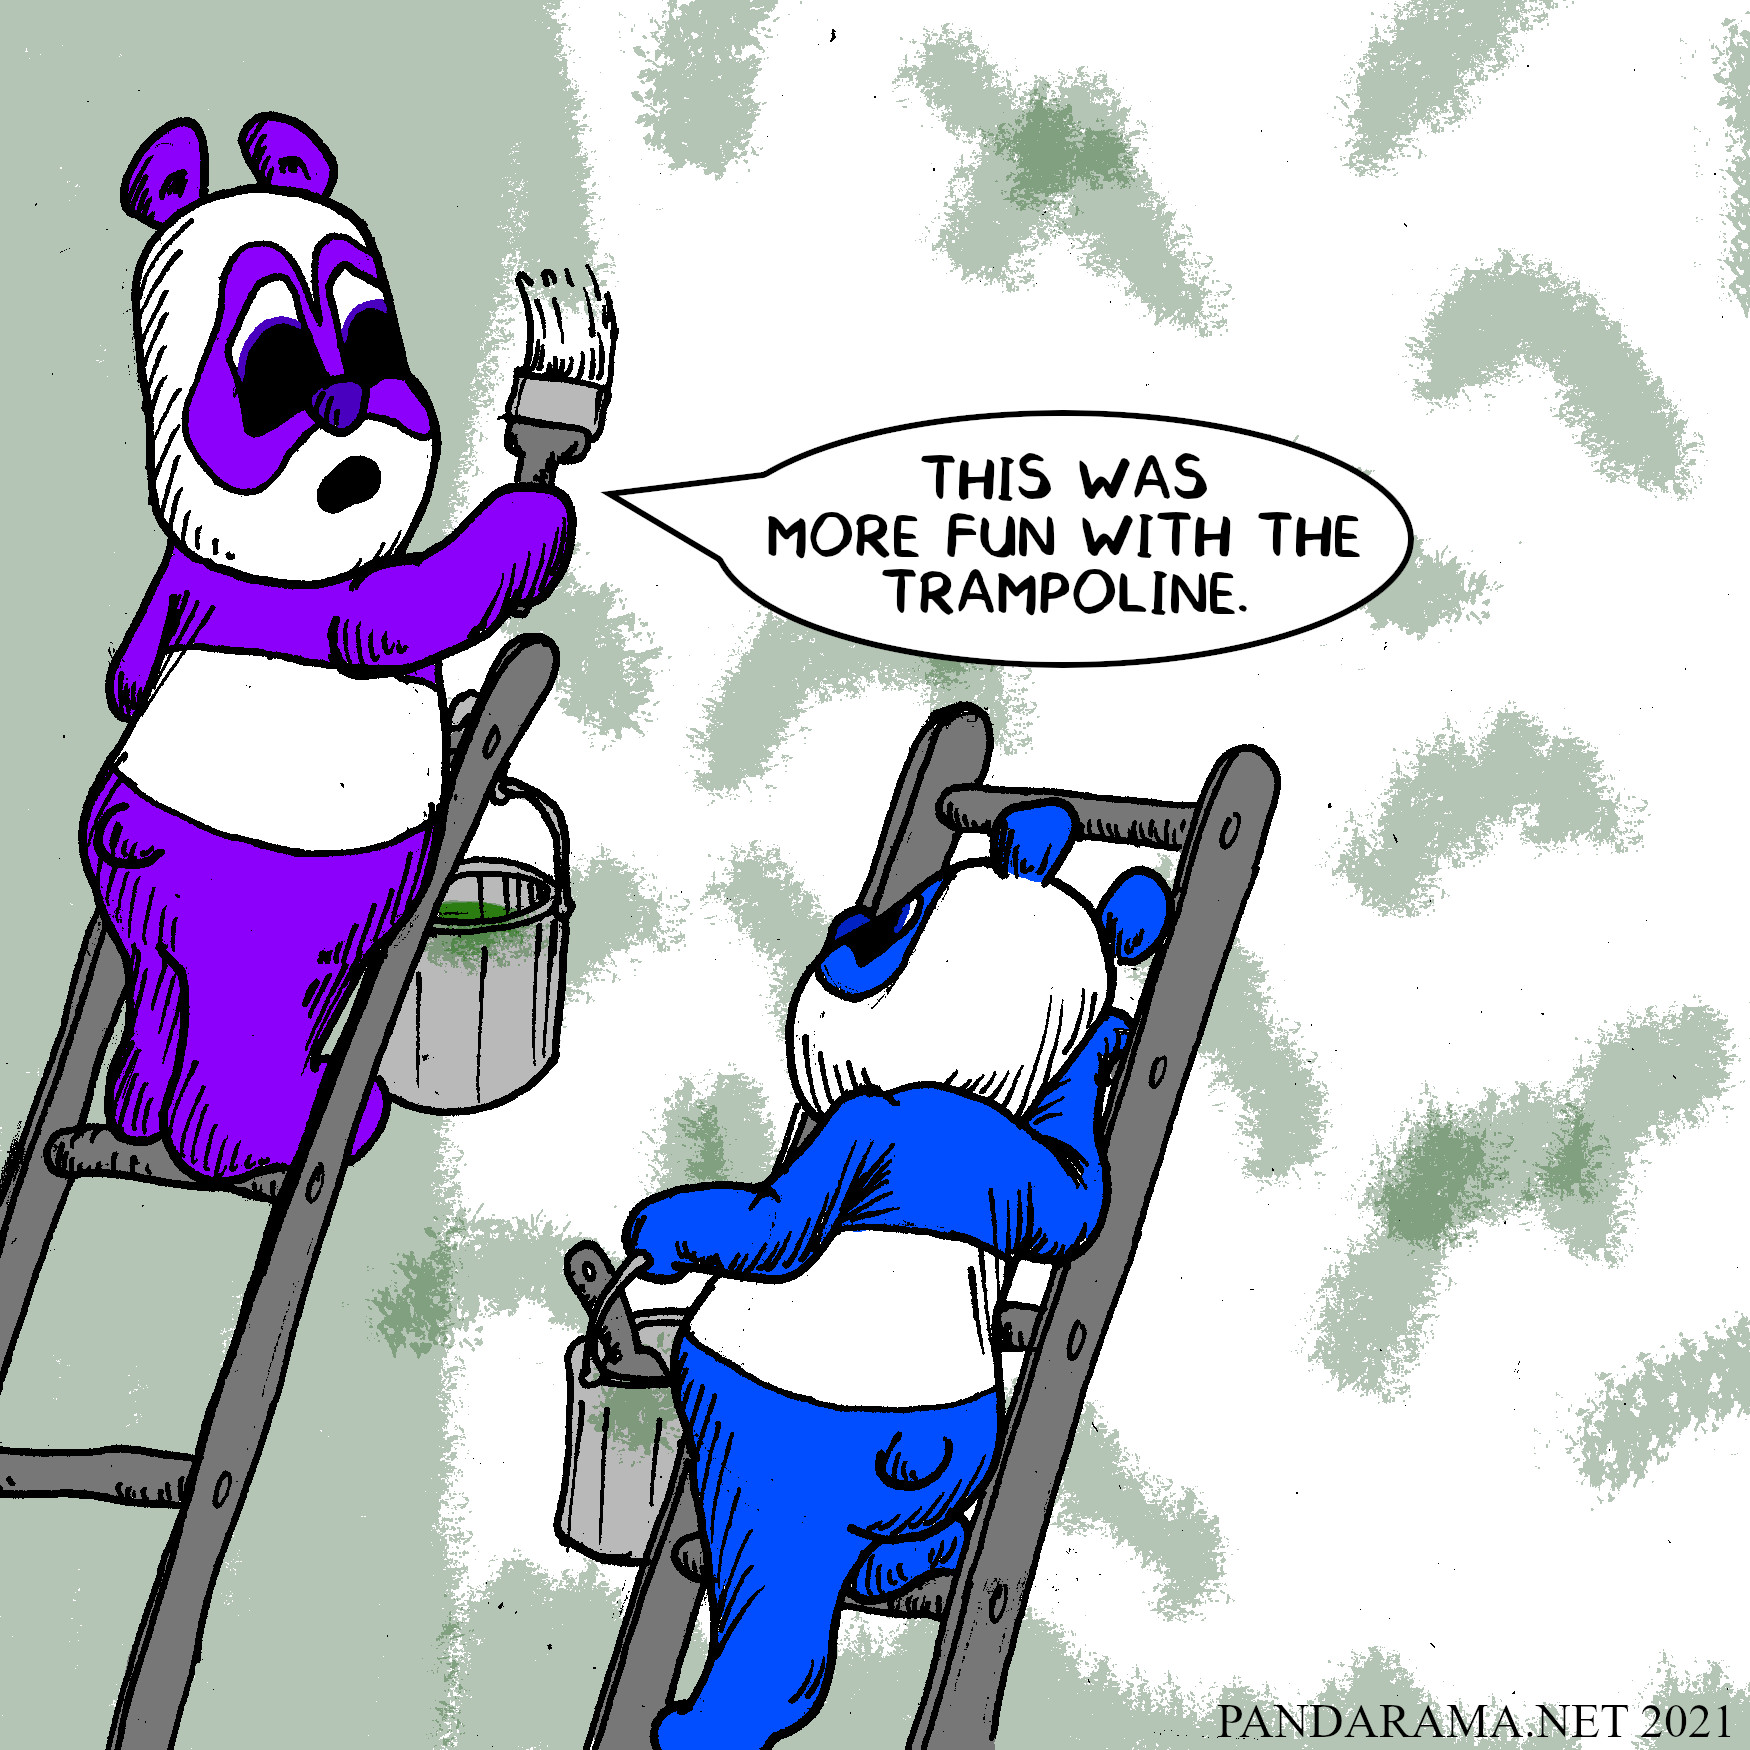 cartoon. pandas painting a wall on ladders wish they had a trampoline instead.